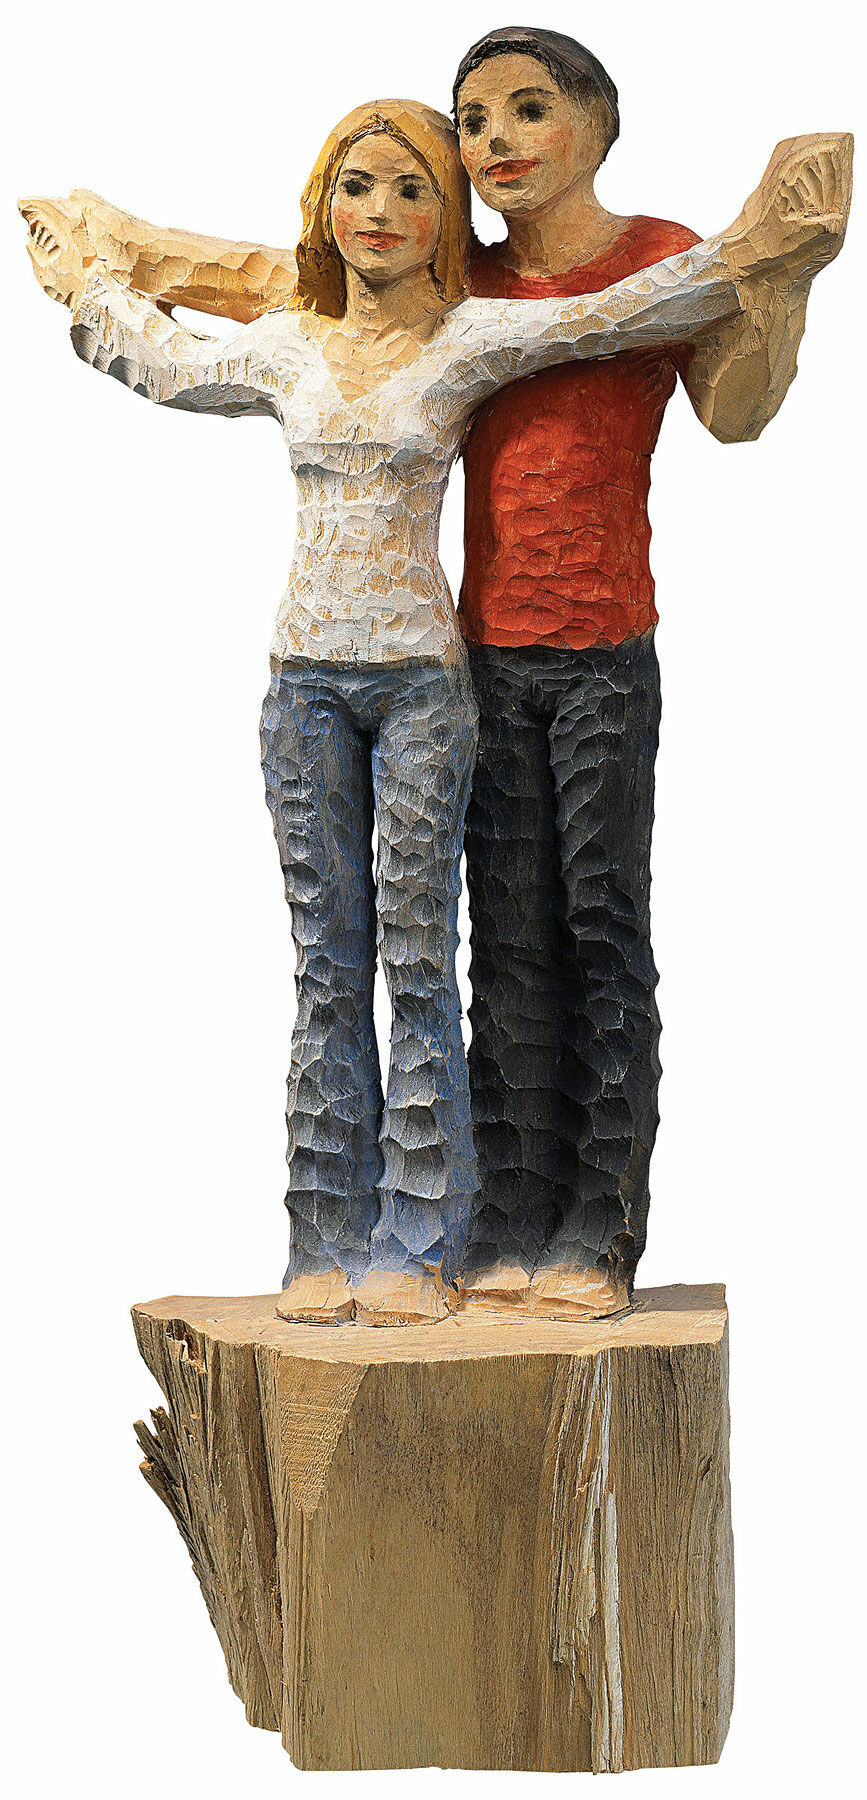 Sculpture "Lovers", cast wood finish by Michael Pickl